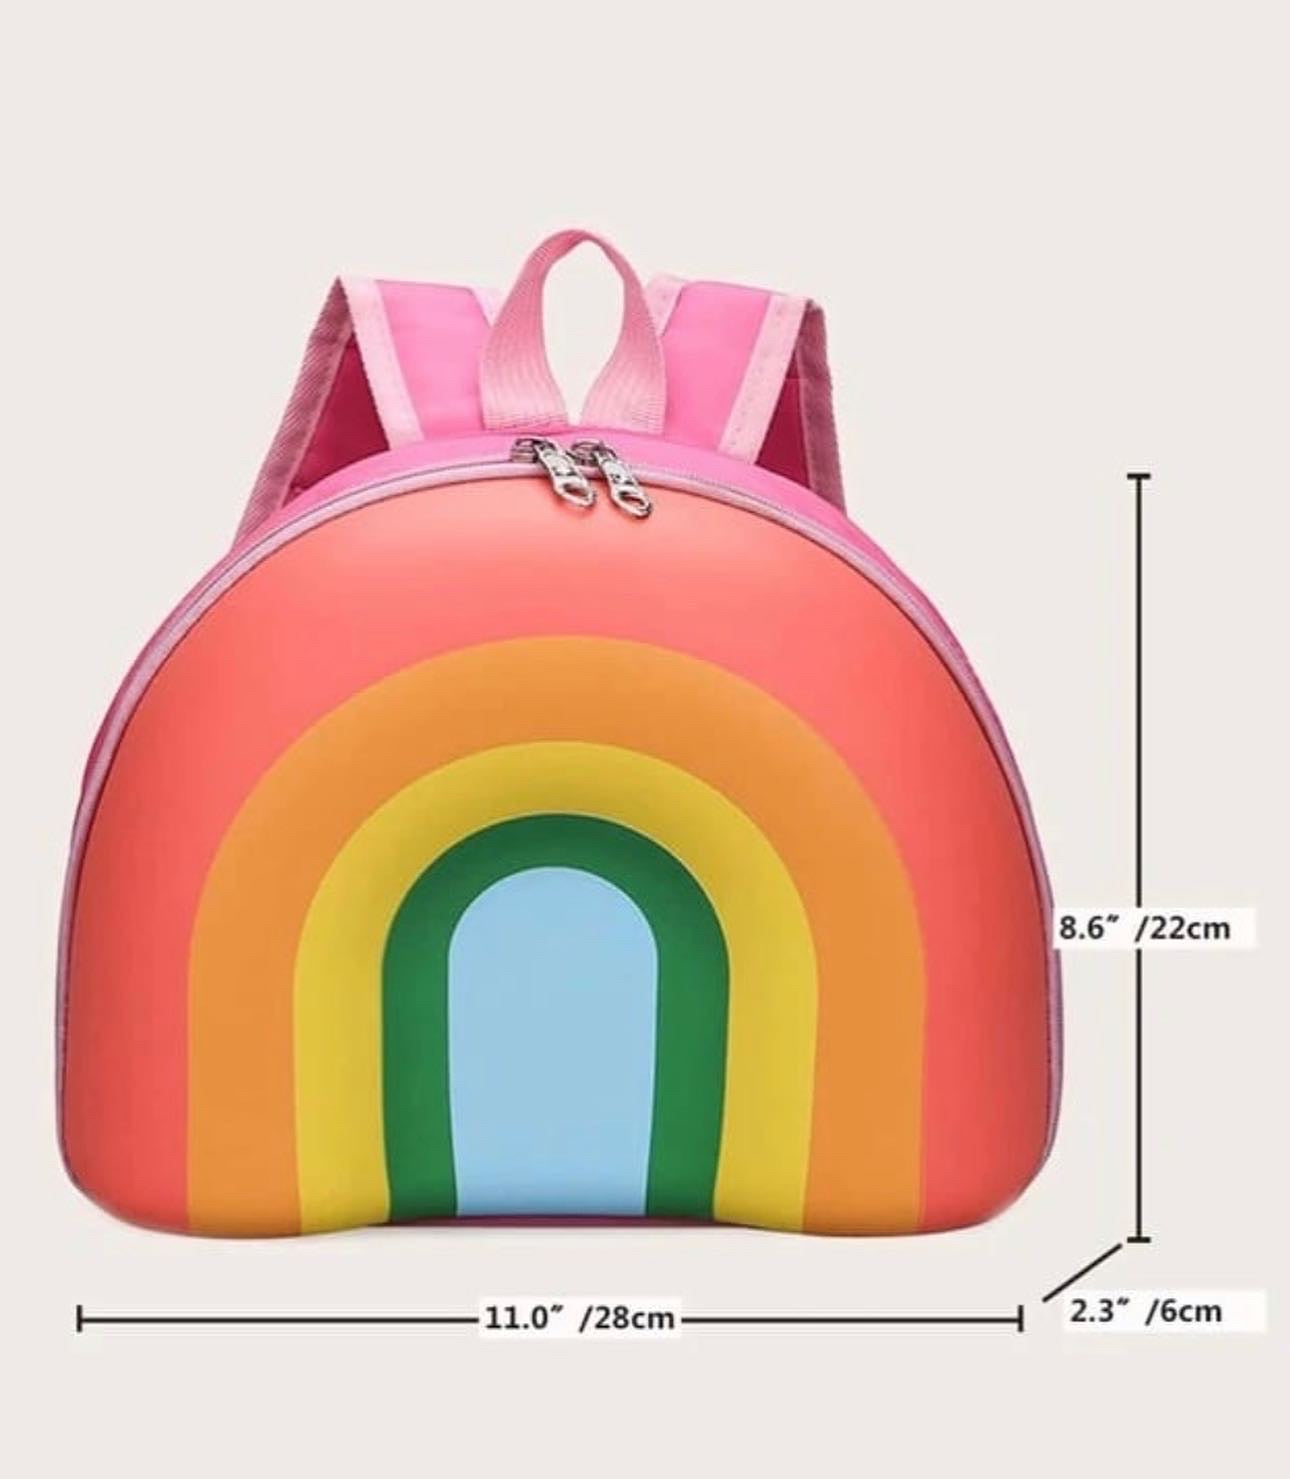 Cute Backpack for Toddlers, Ideal for Day care, Preschool/Nursery